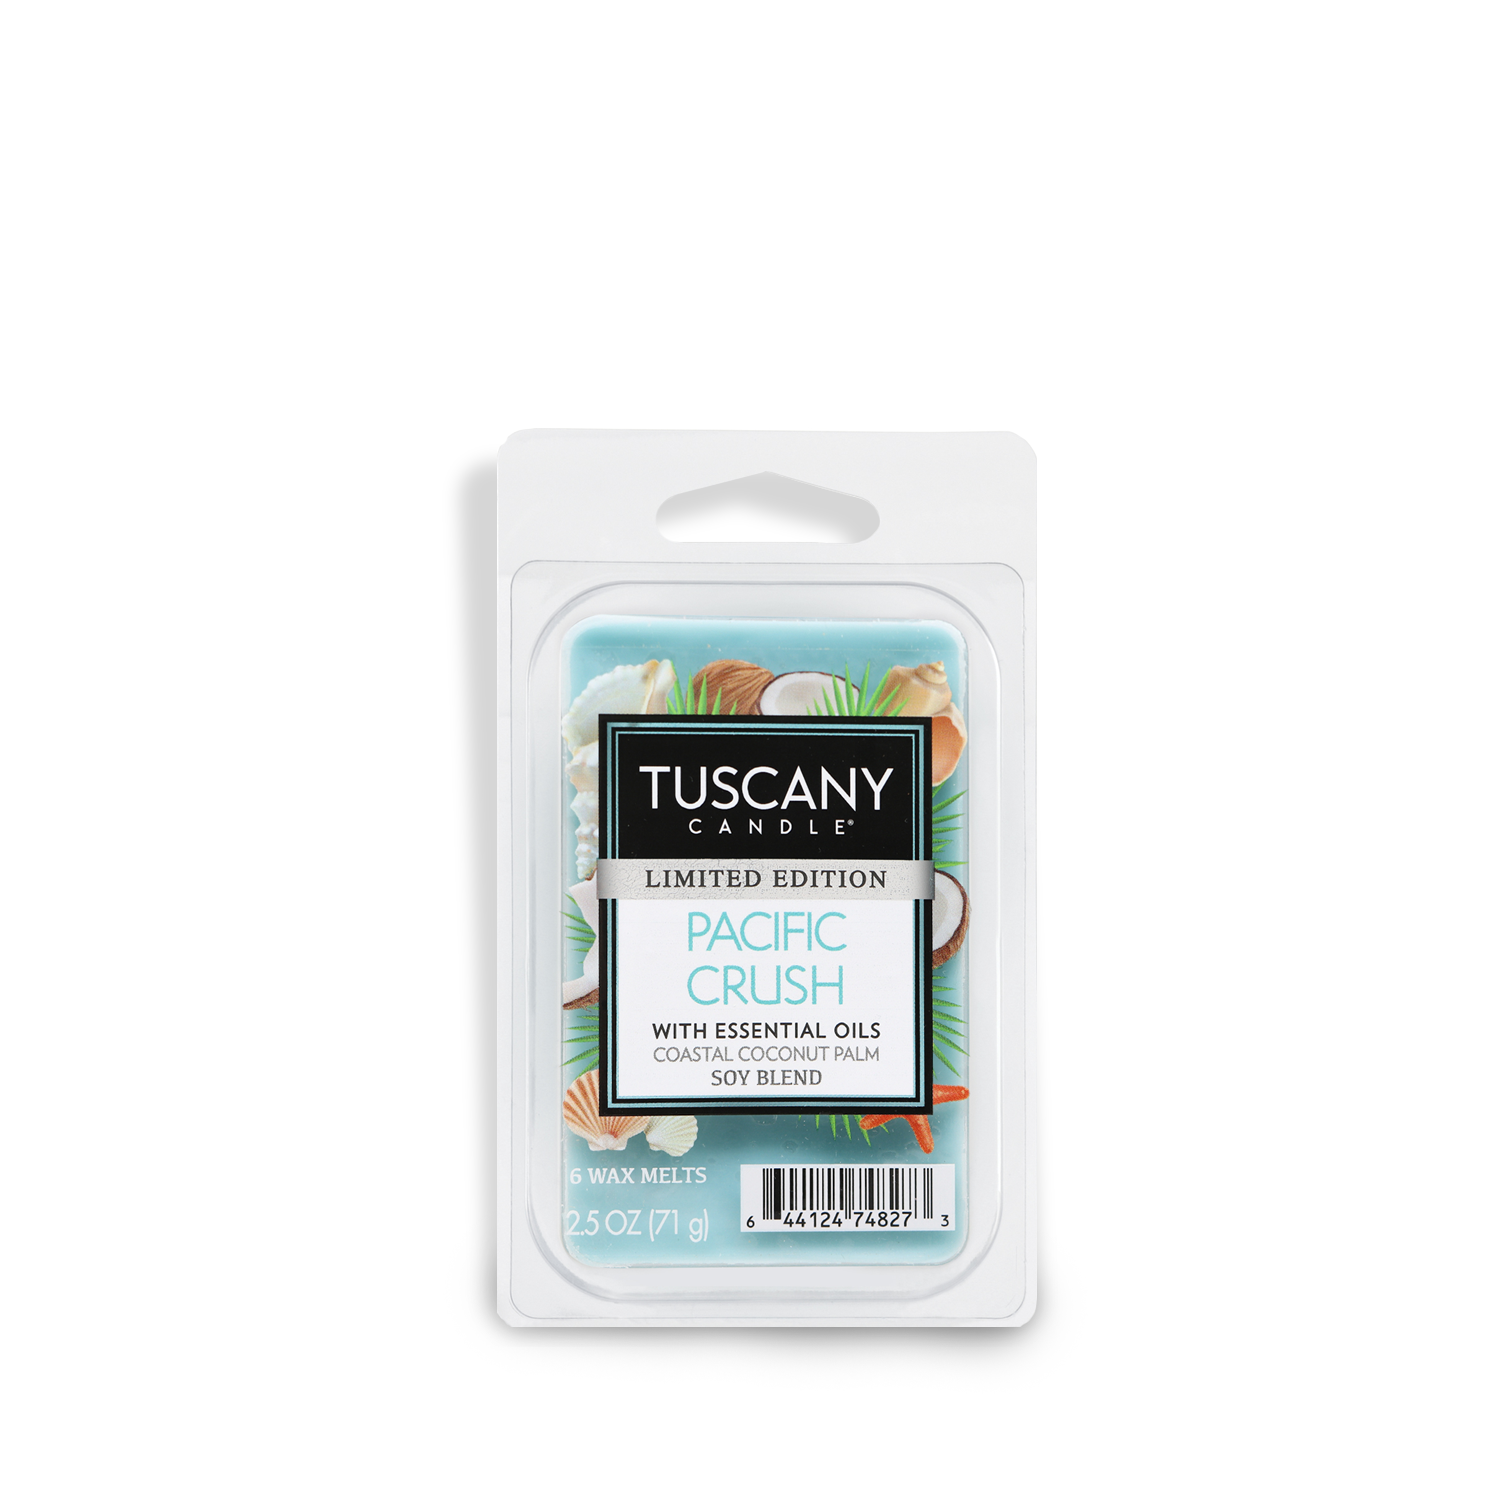 Packaged Tuscany Candle® SEASONAL Pacific Crush scented wax melts with essential oils, limited edition soy blend.